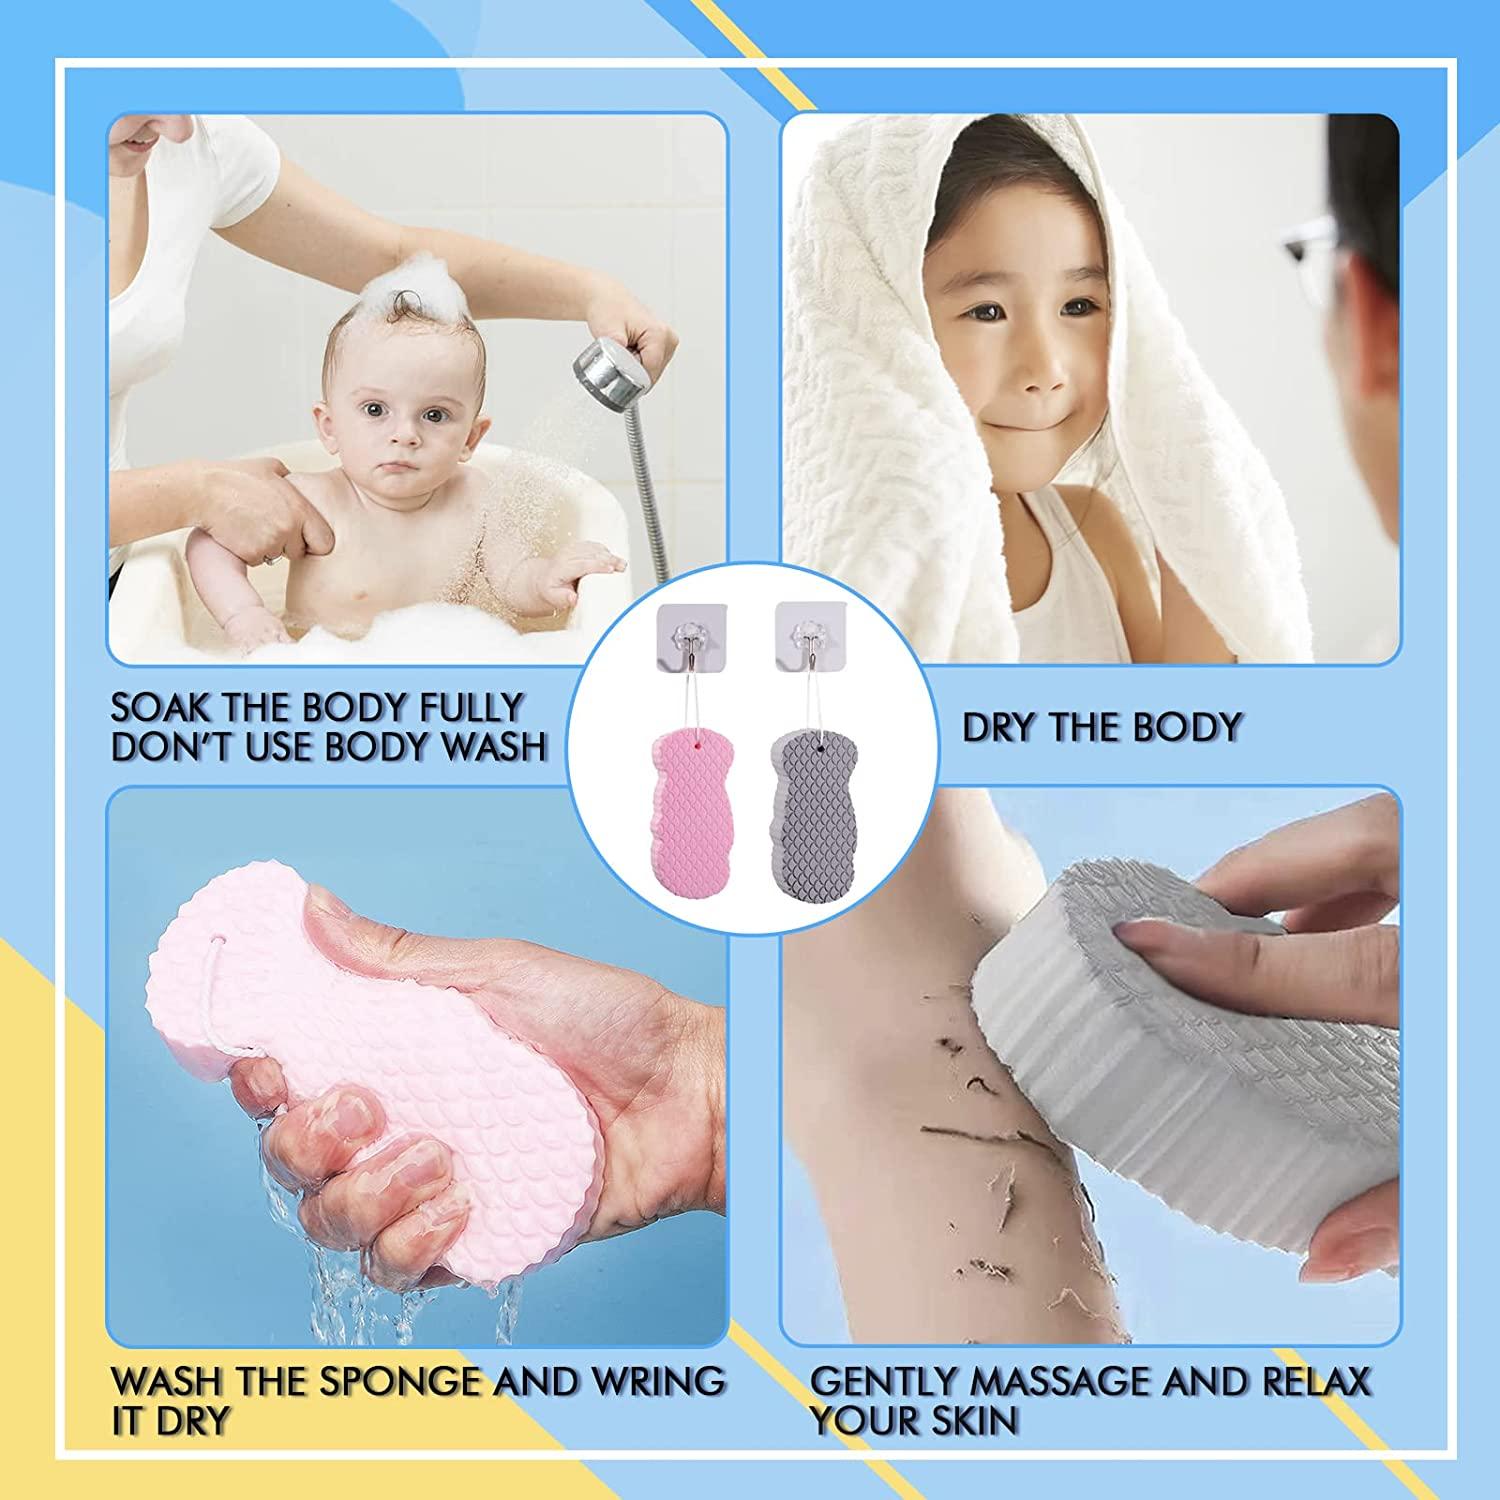 Qweryboo 3 Pcs Exfoliating Bath Sponge, Soft Spa Scrub Sponges for Shower, Dead  Skin Remover for Body for Adult Baby(Pink,Blue,Grey) 